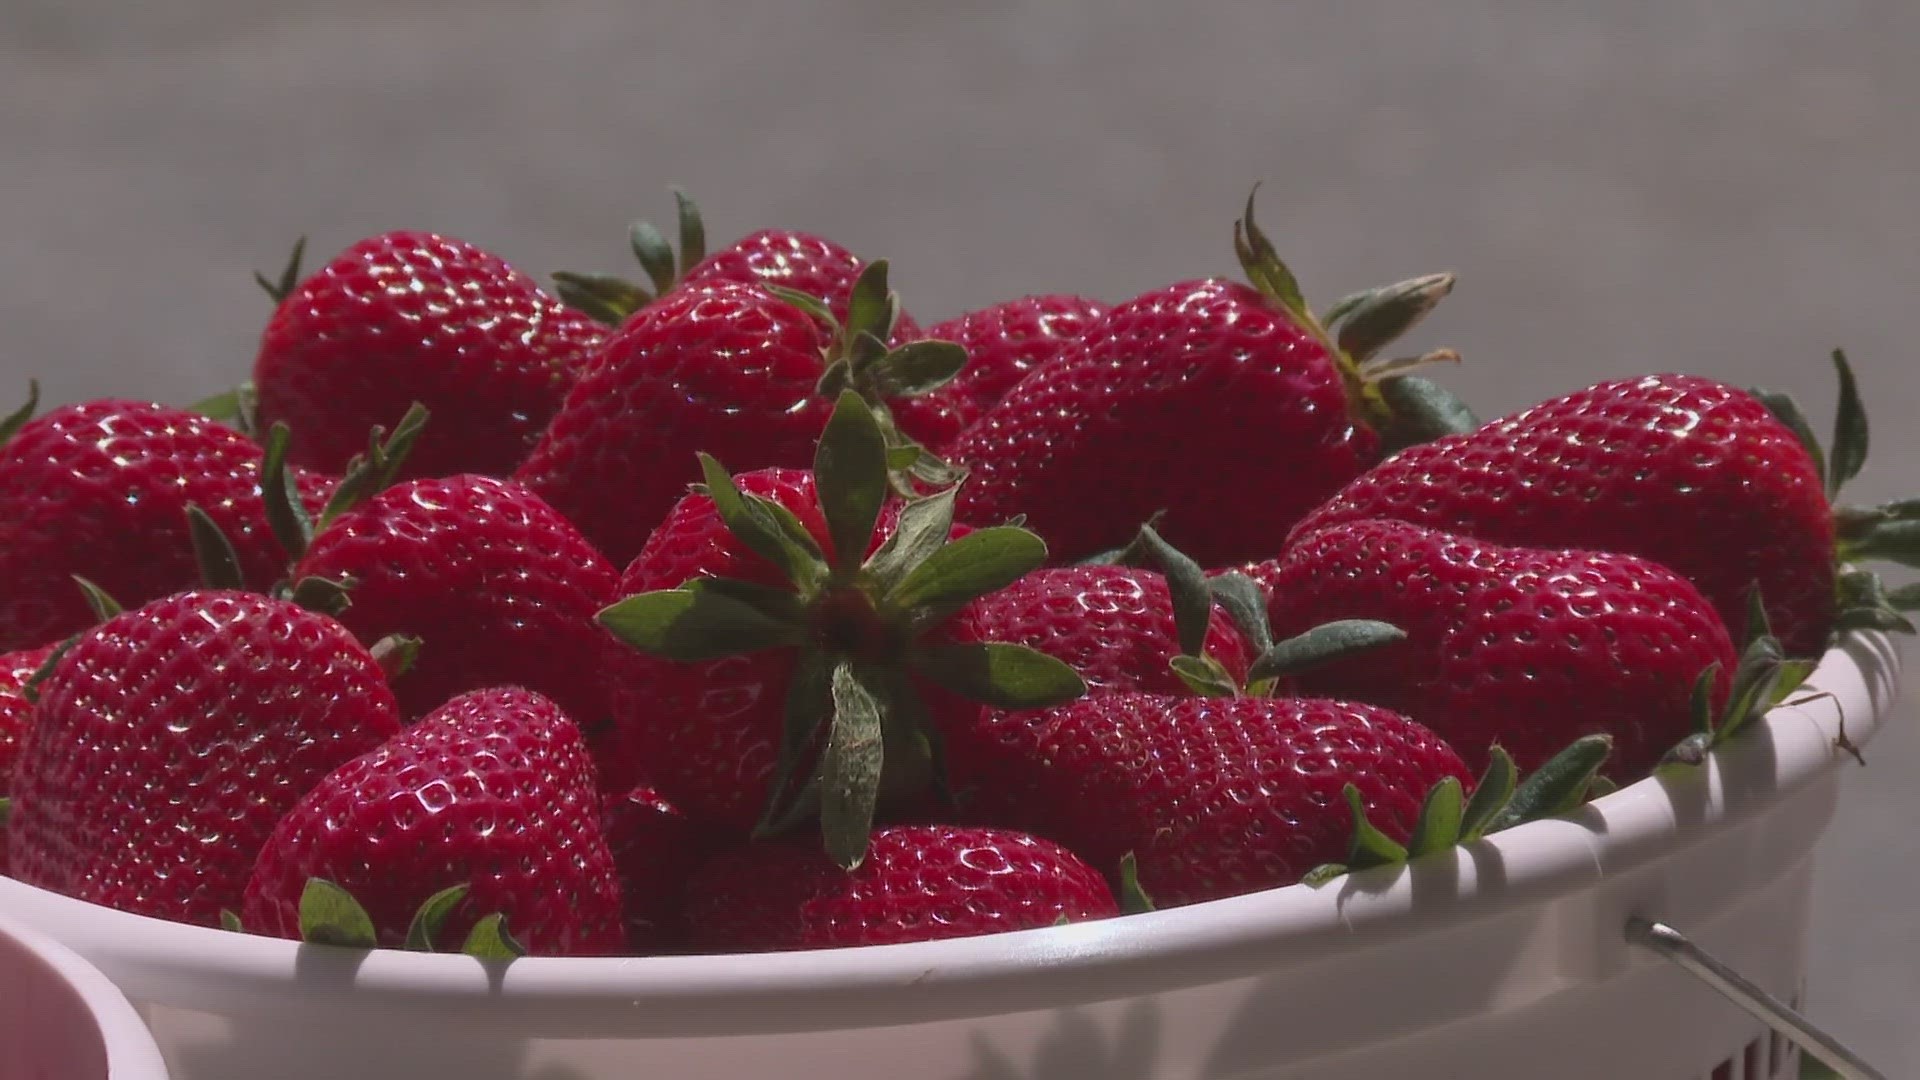 Rudd Farm sees a large turnout for strawberries on their first day.